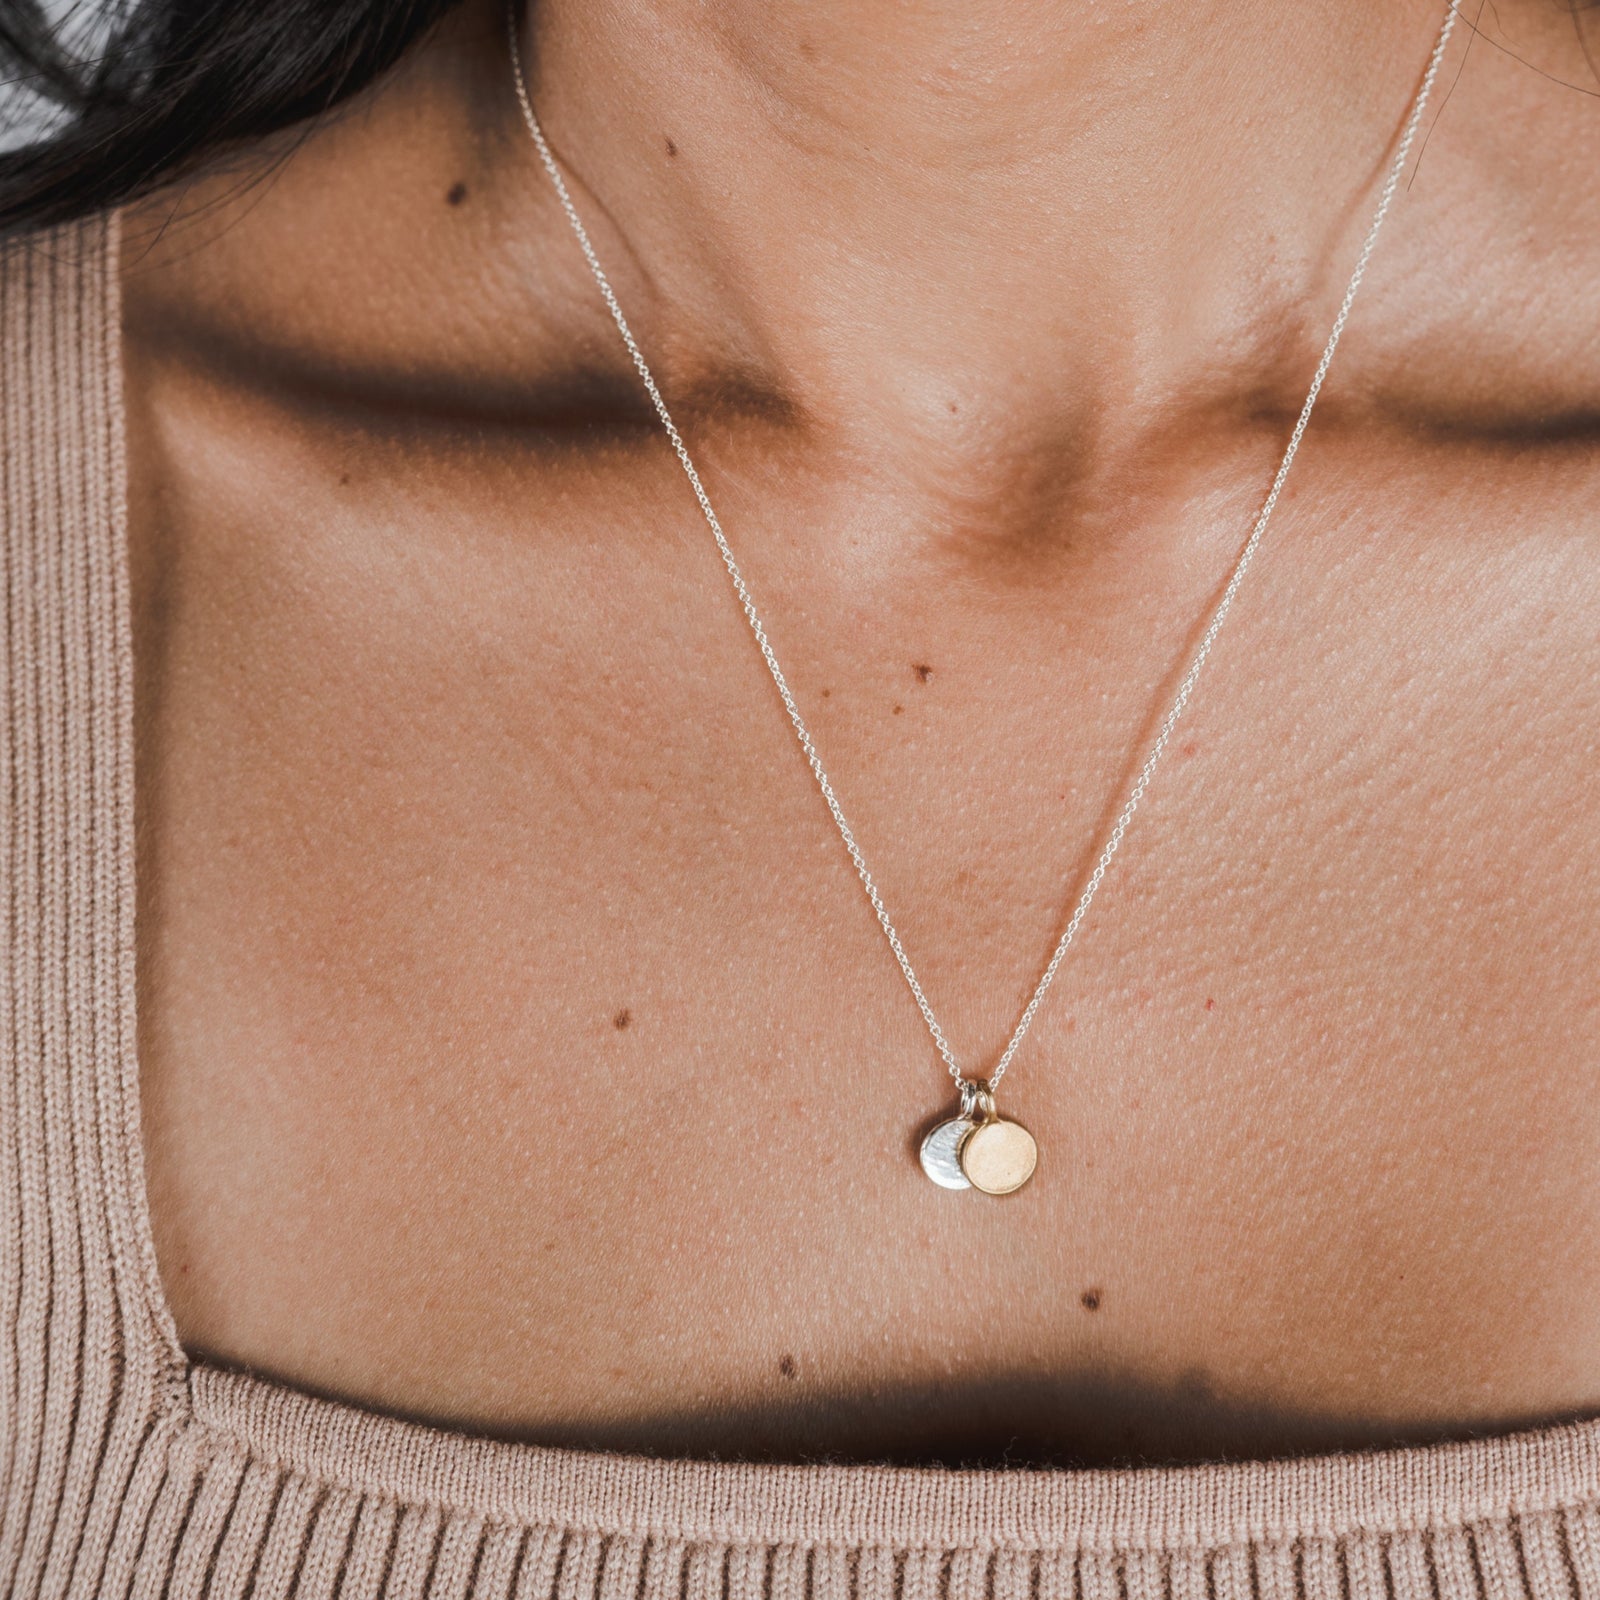 A close-up of a person wearing Becoming Jewelry's Count My Blessings Necklace, a delicate, layered necklace with small silver & gold vermeil charms.